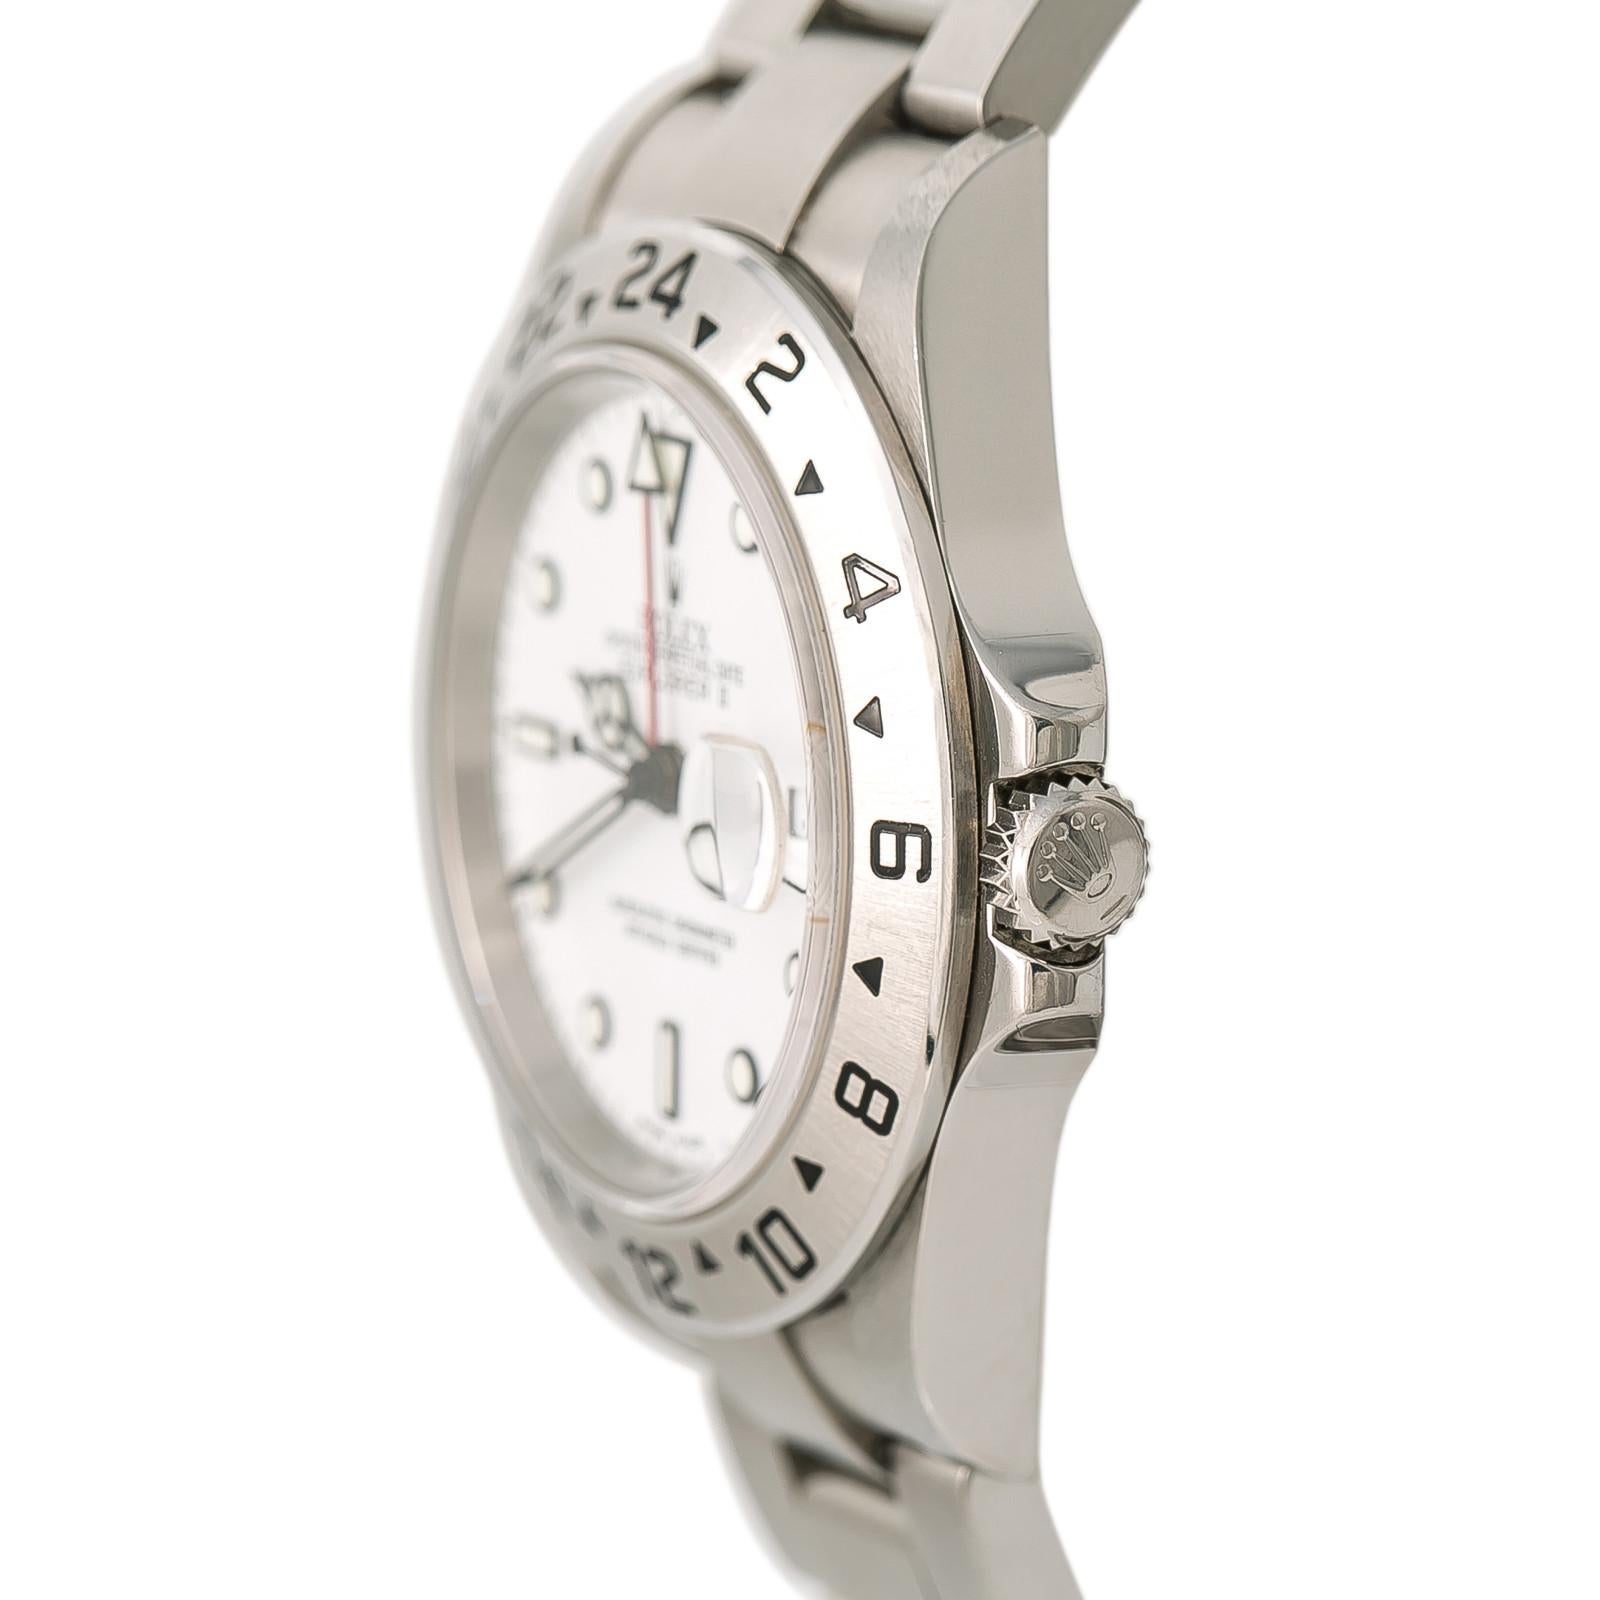 Rolex Explorer II6840, Dial Certified Authentic For Sale 1